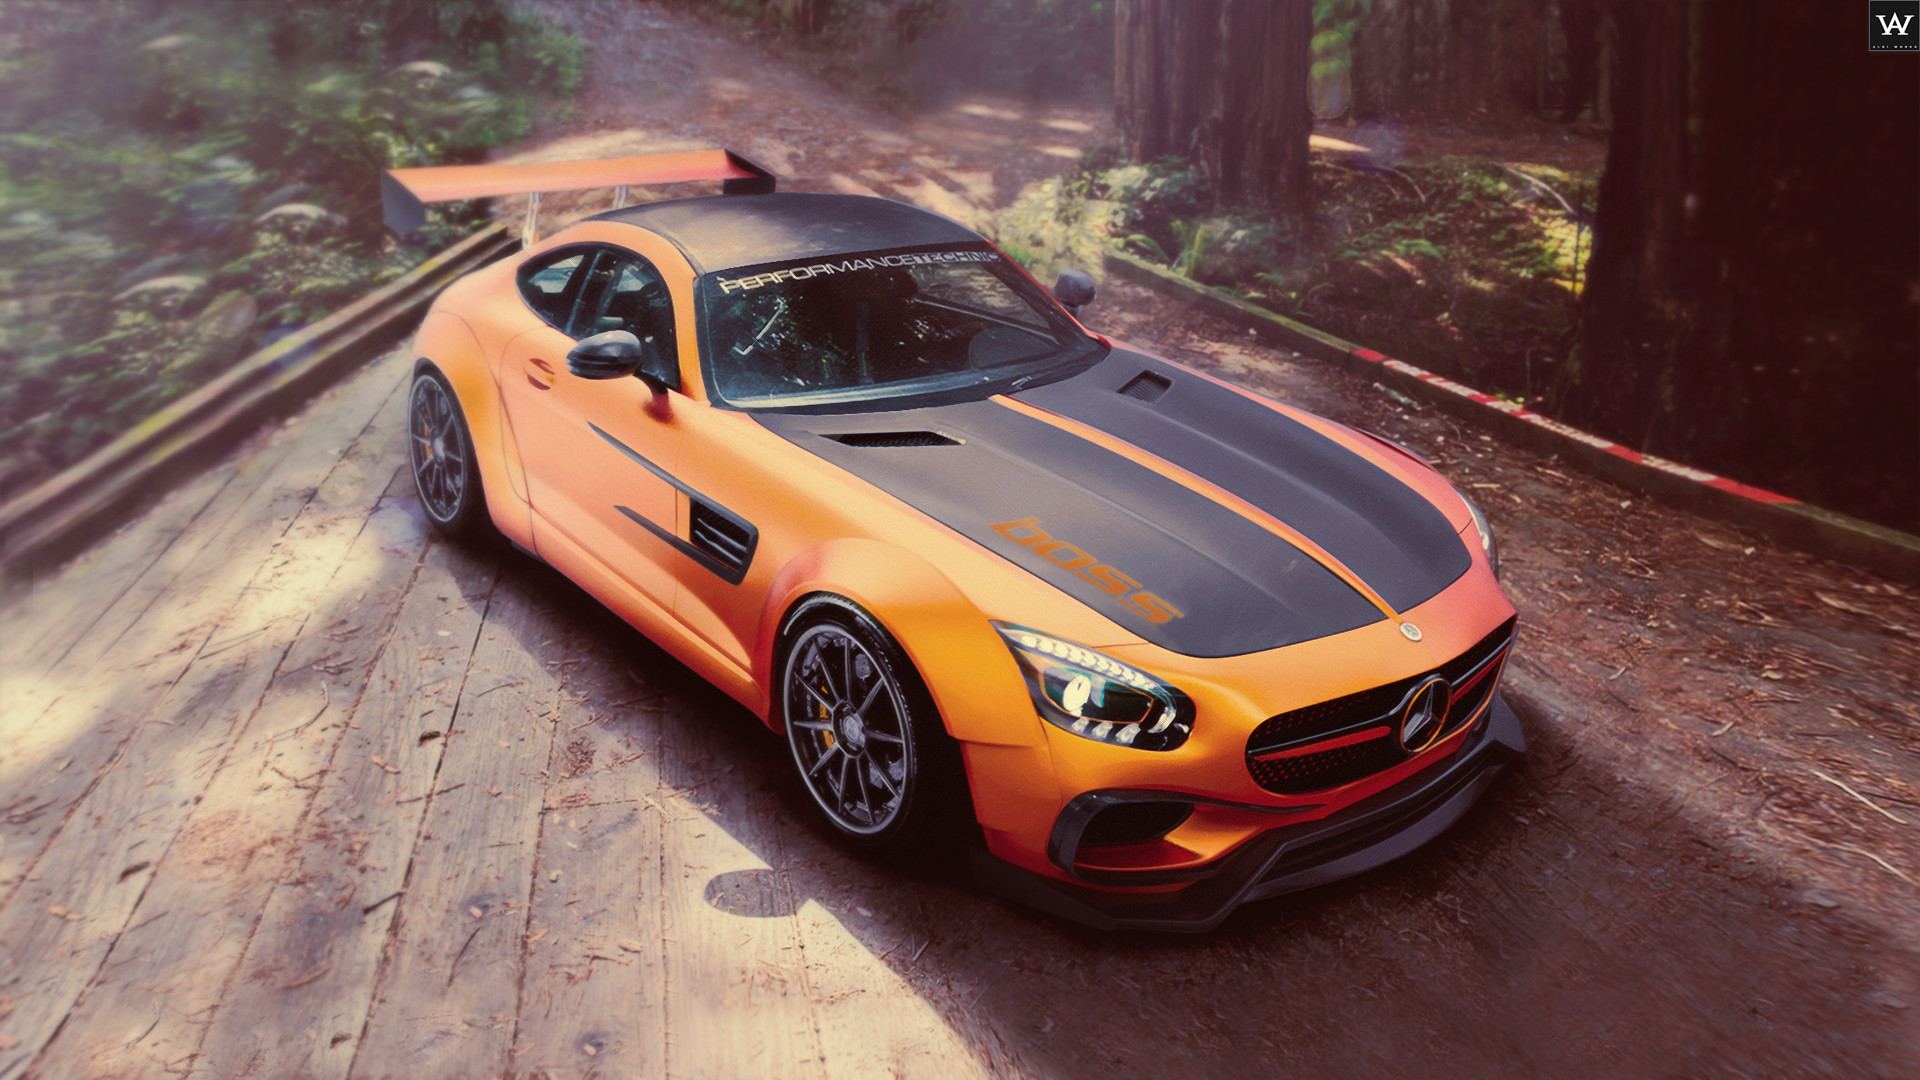 General 1920x1080 car CGI nature planks forest sports car